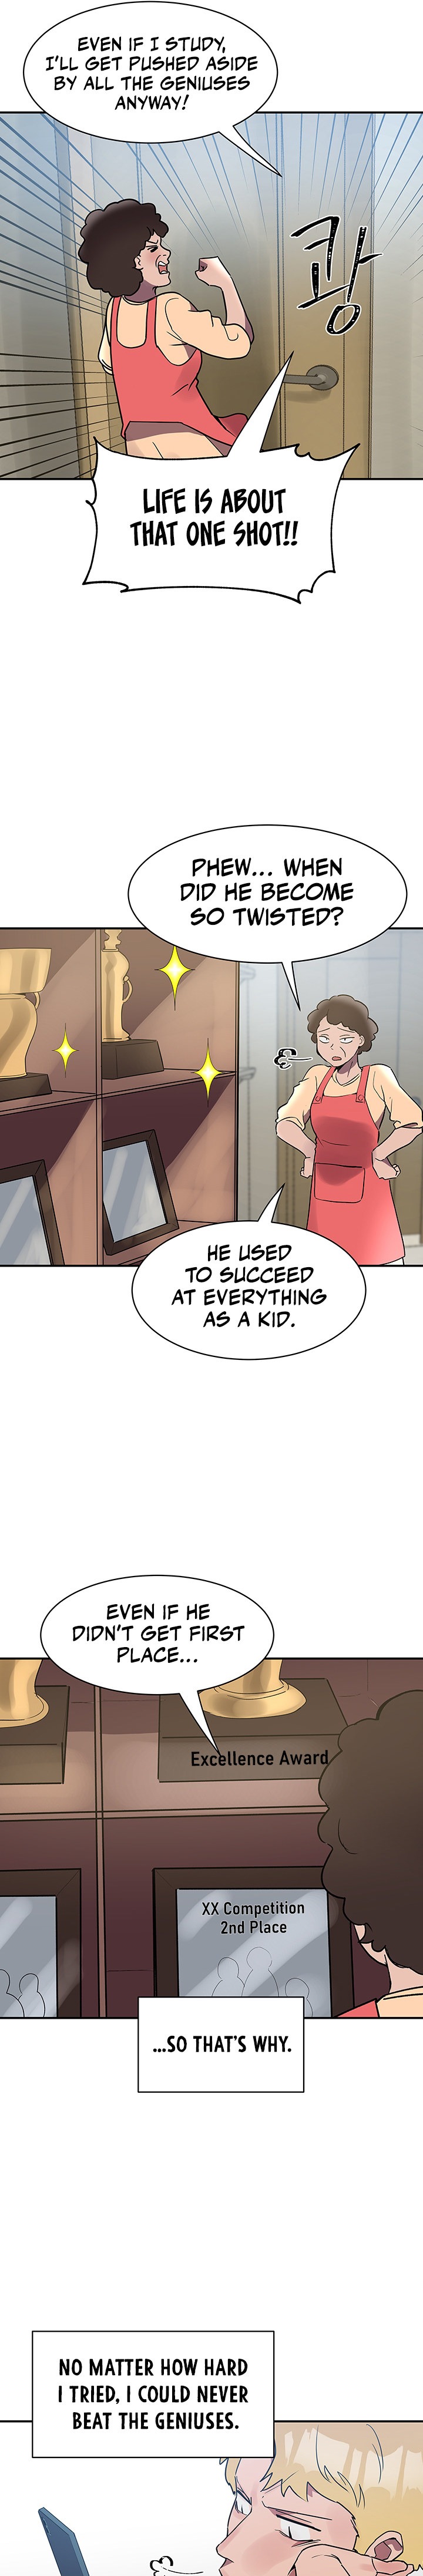 Relationship Reverse Button: Let’s Educate That Arrogant Girl - Chapter 1 Page 4